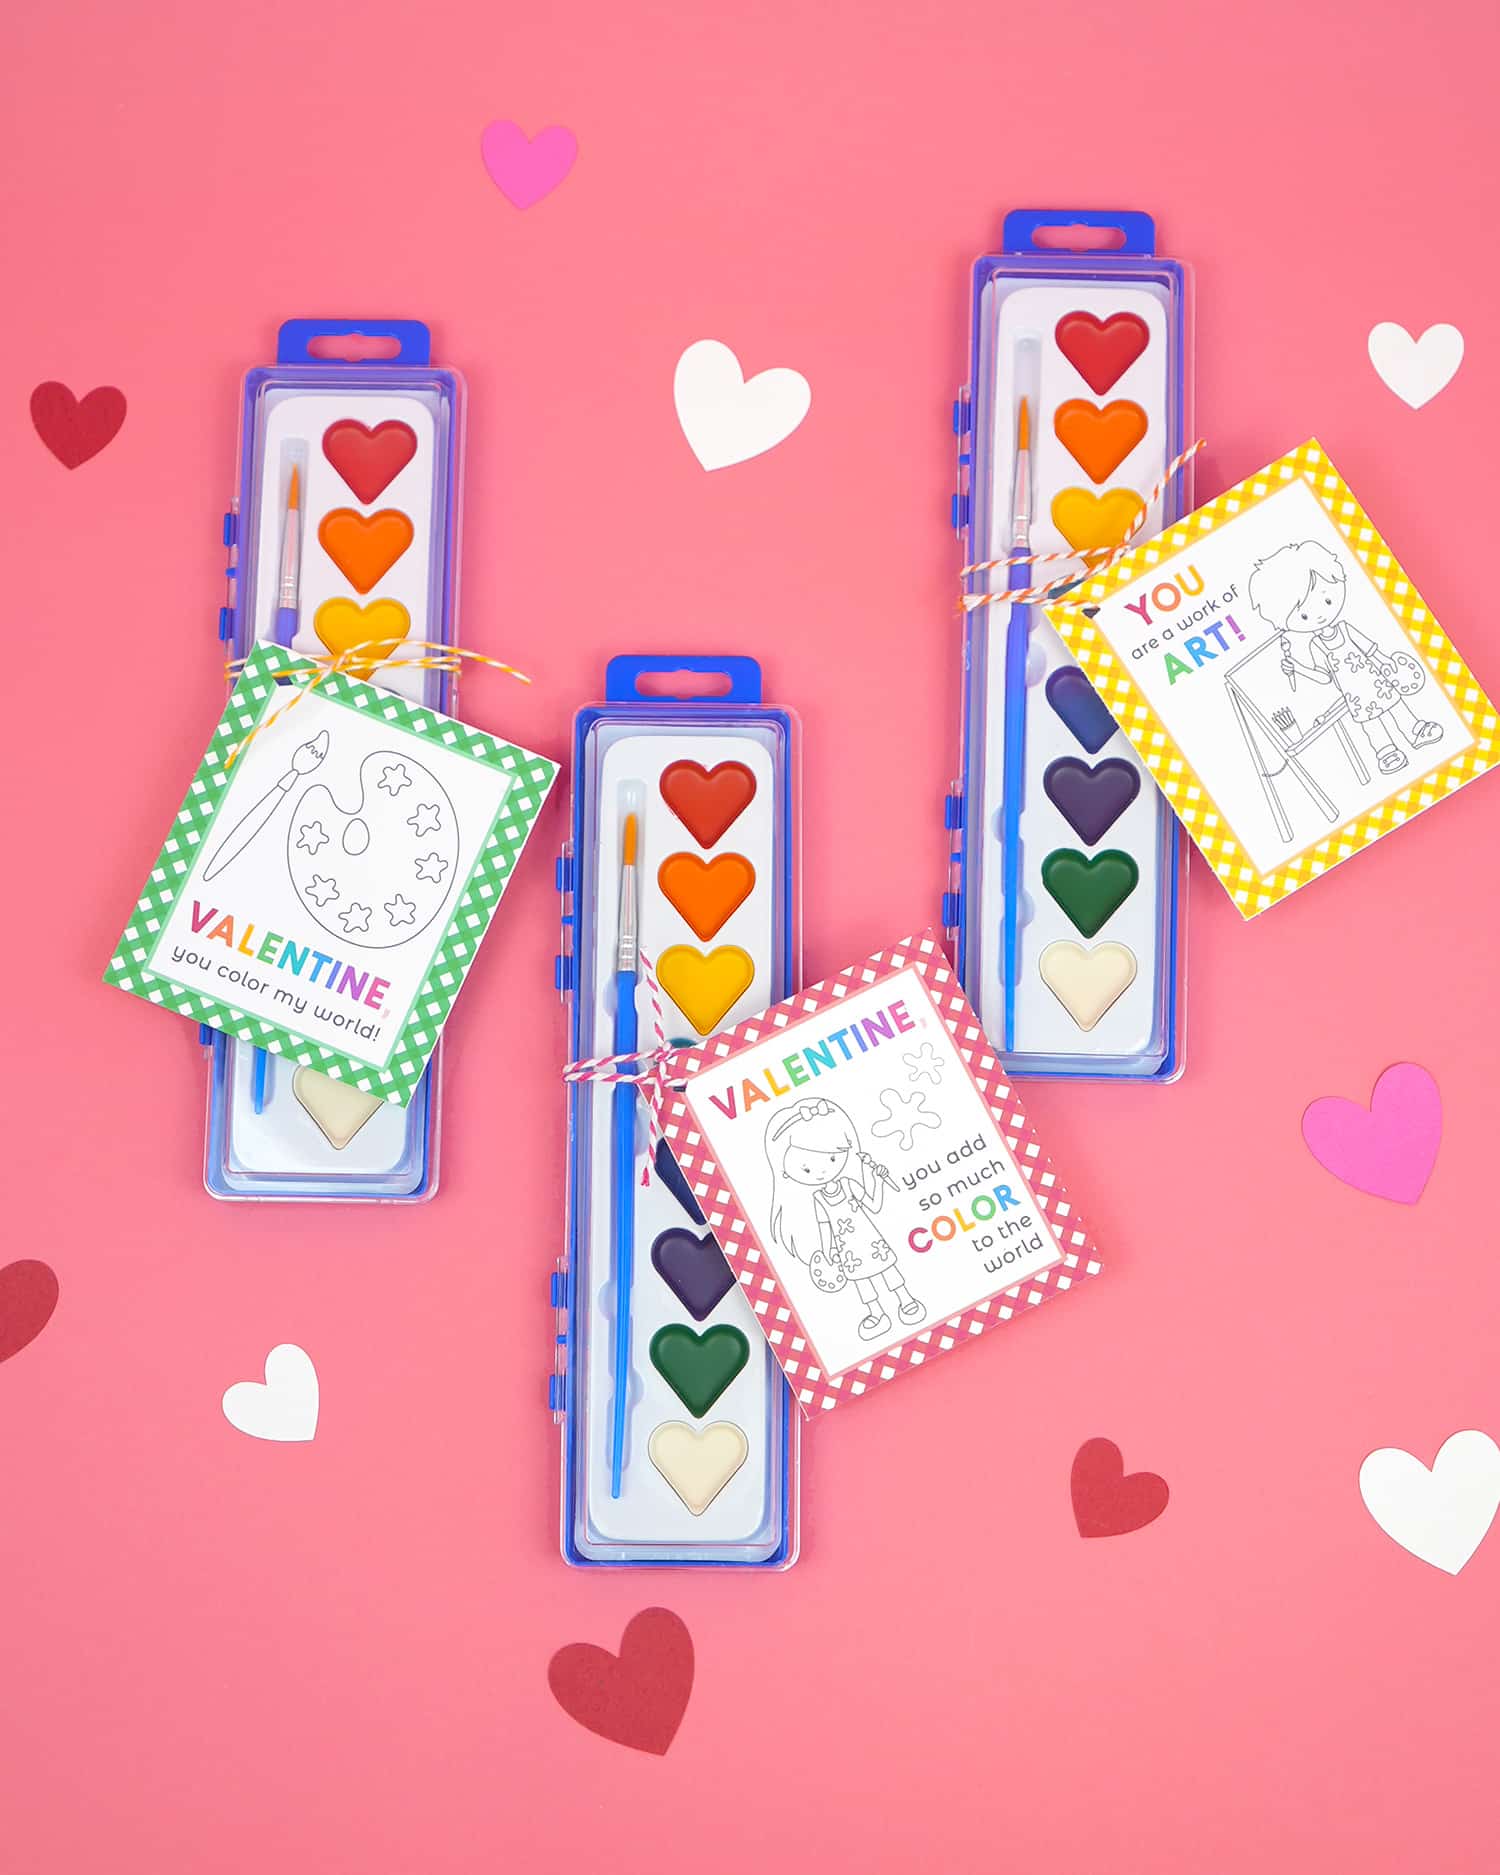 Classroom Printable Valentine's Cards for your Students